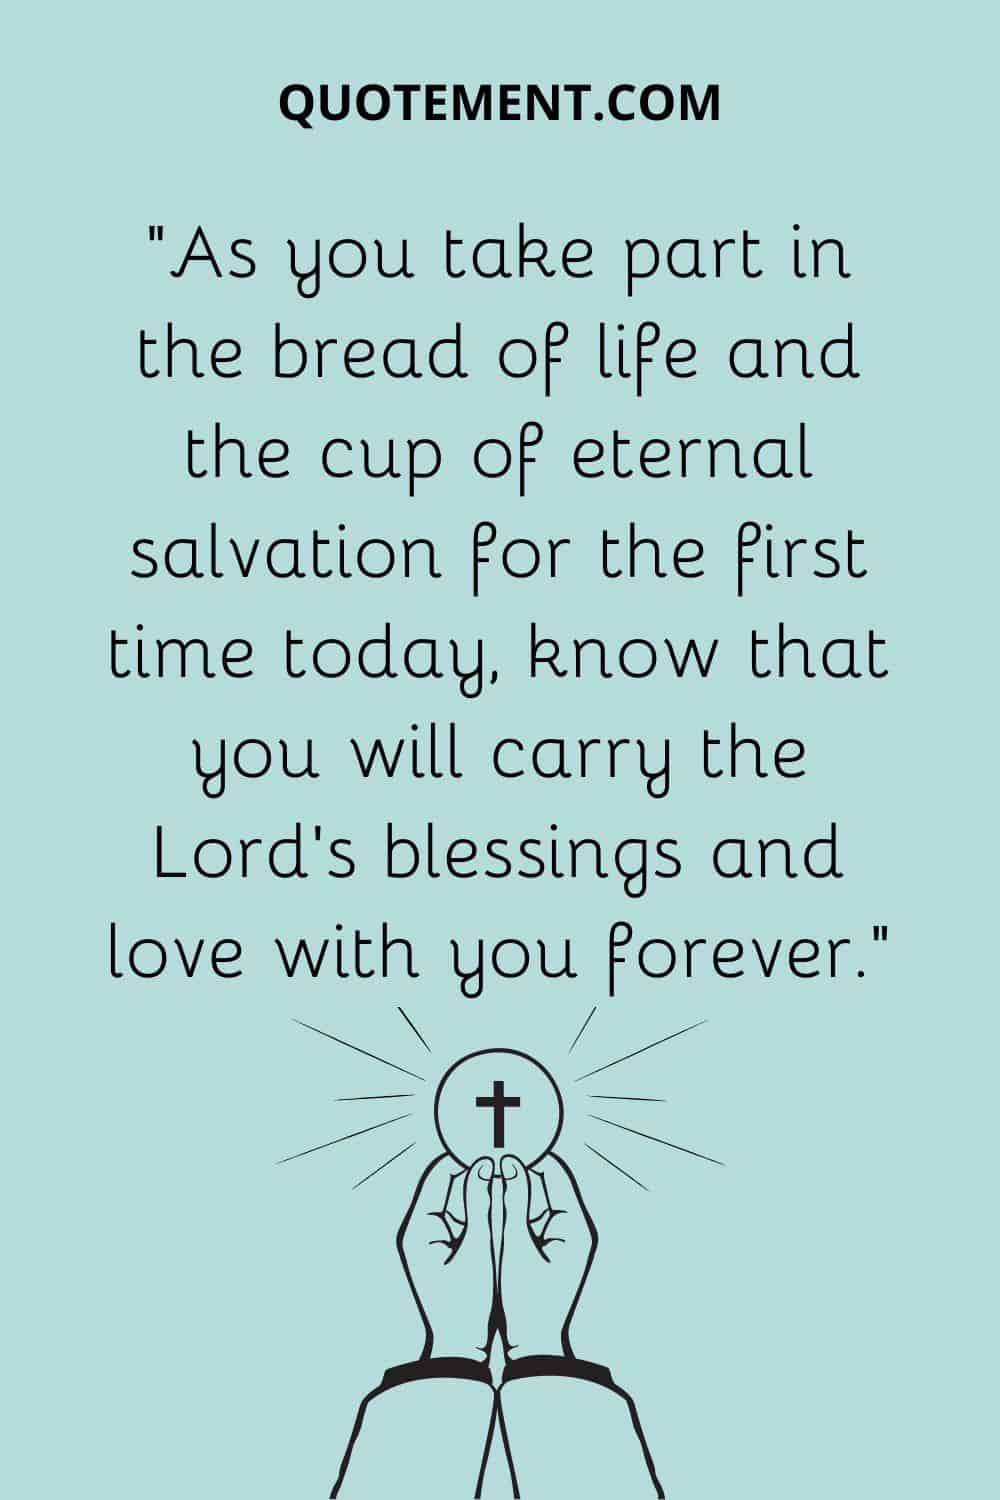 “As you take part in the bread of life and the cup of eternal salvation for the first time today, know that you will carry the Lord’s blessings and love with you forever.”